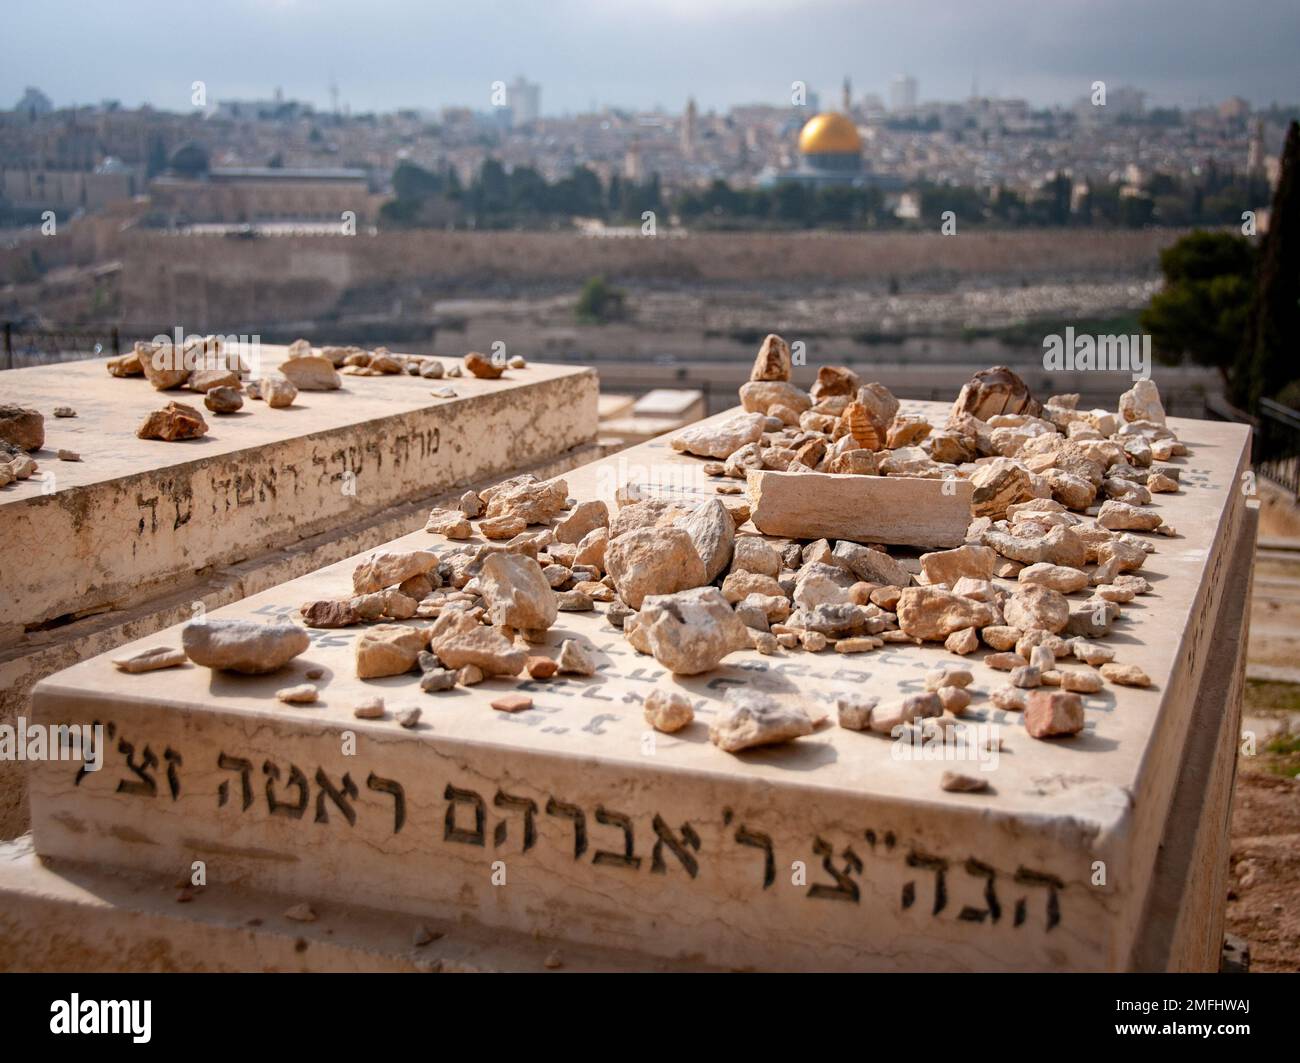 The Greve with stones, Dome of the rock, Israel Stock Photo - Alamy